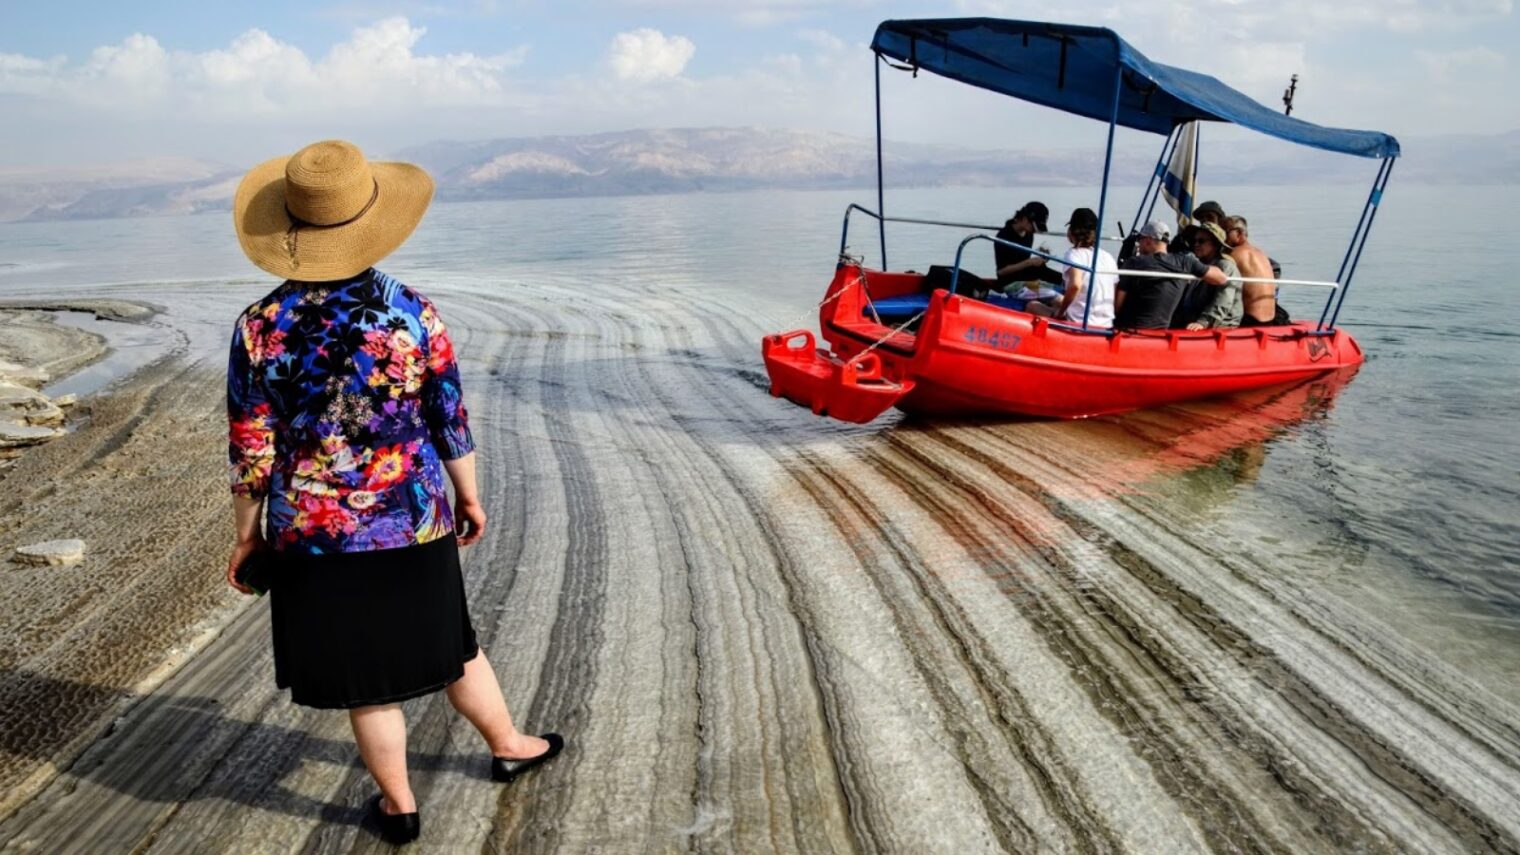 Dead Sea activist and photographer Noam Bedein takes tourists to see remote parts of the Dead Sea. Photo by Noam Bedein